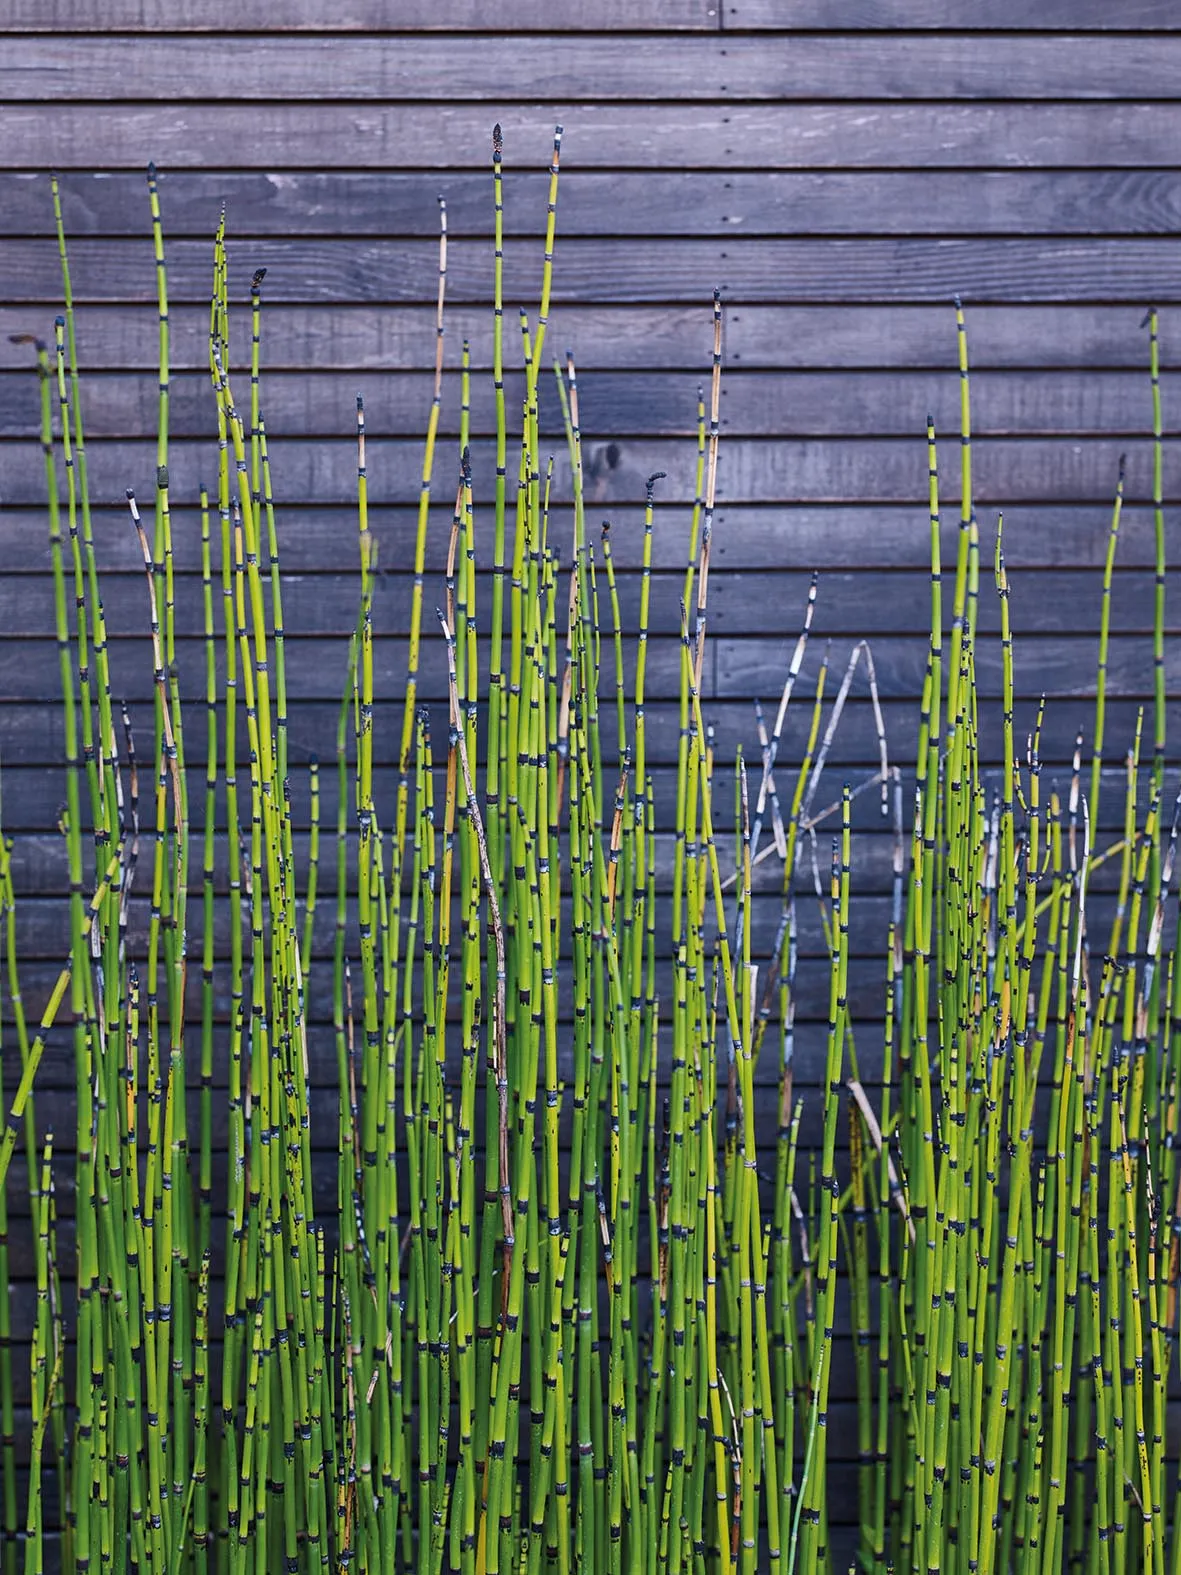 Equisetum hyemale contrasts spectacularly with the horizontal boards on the wall